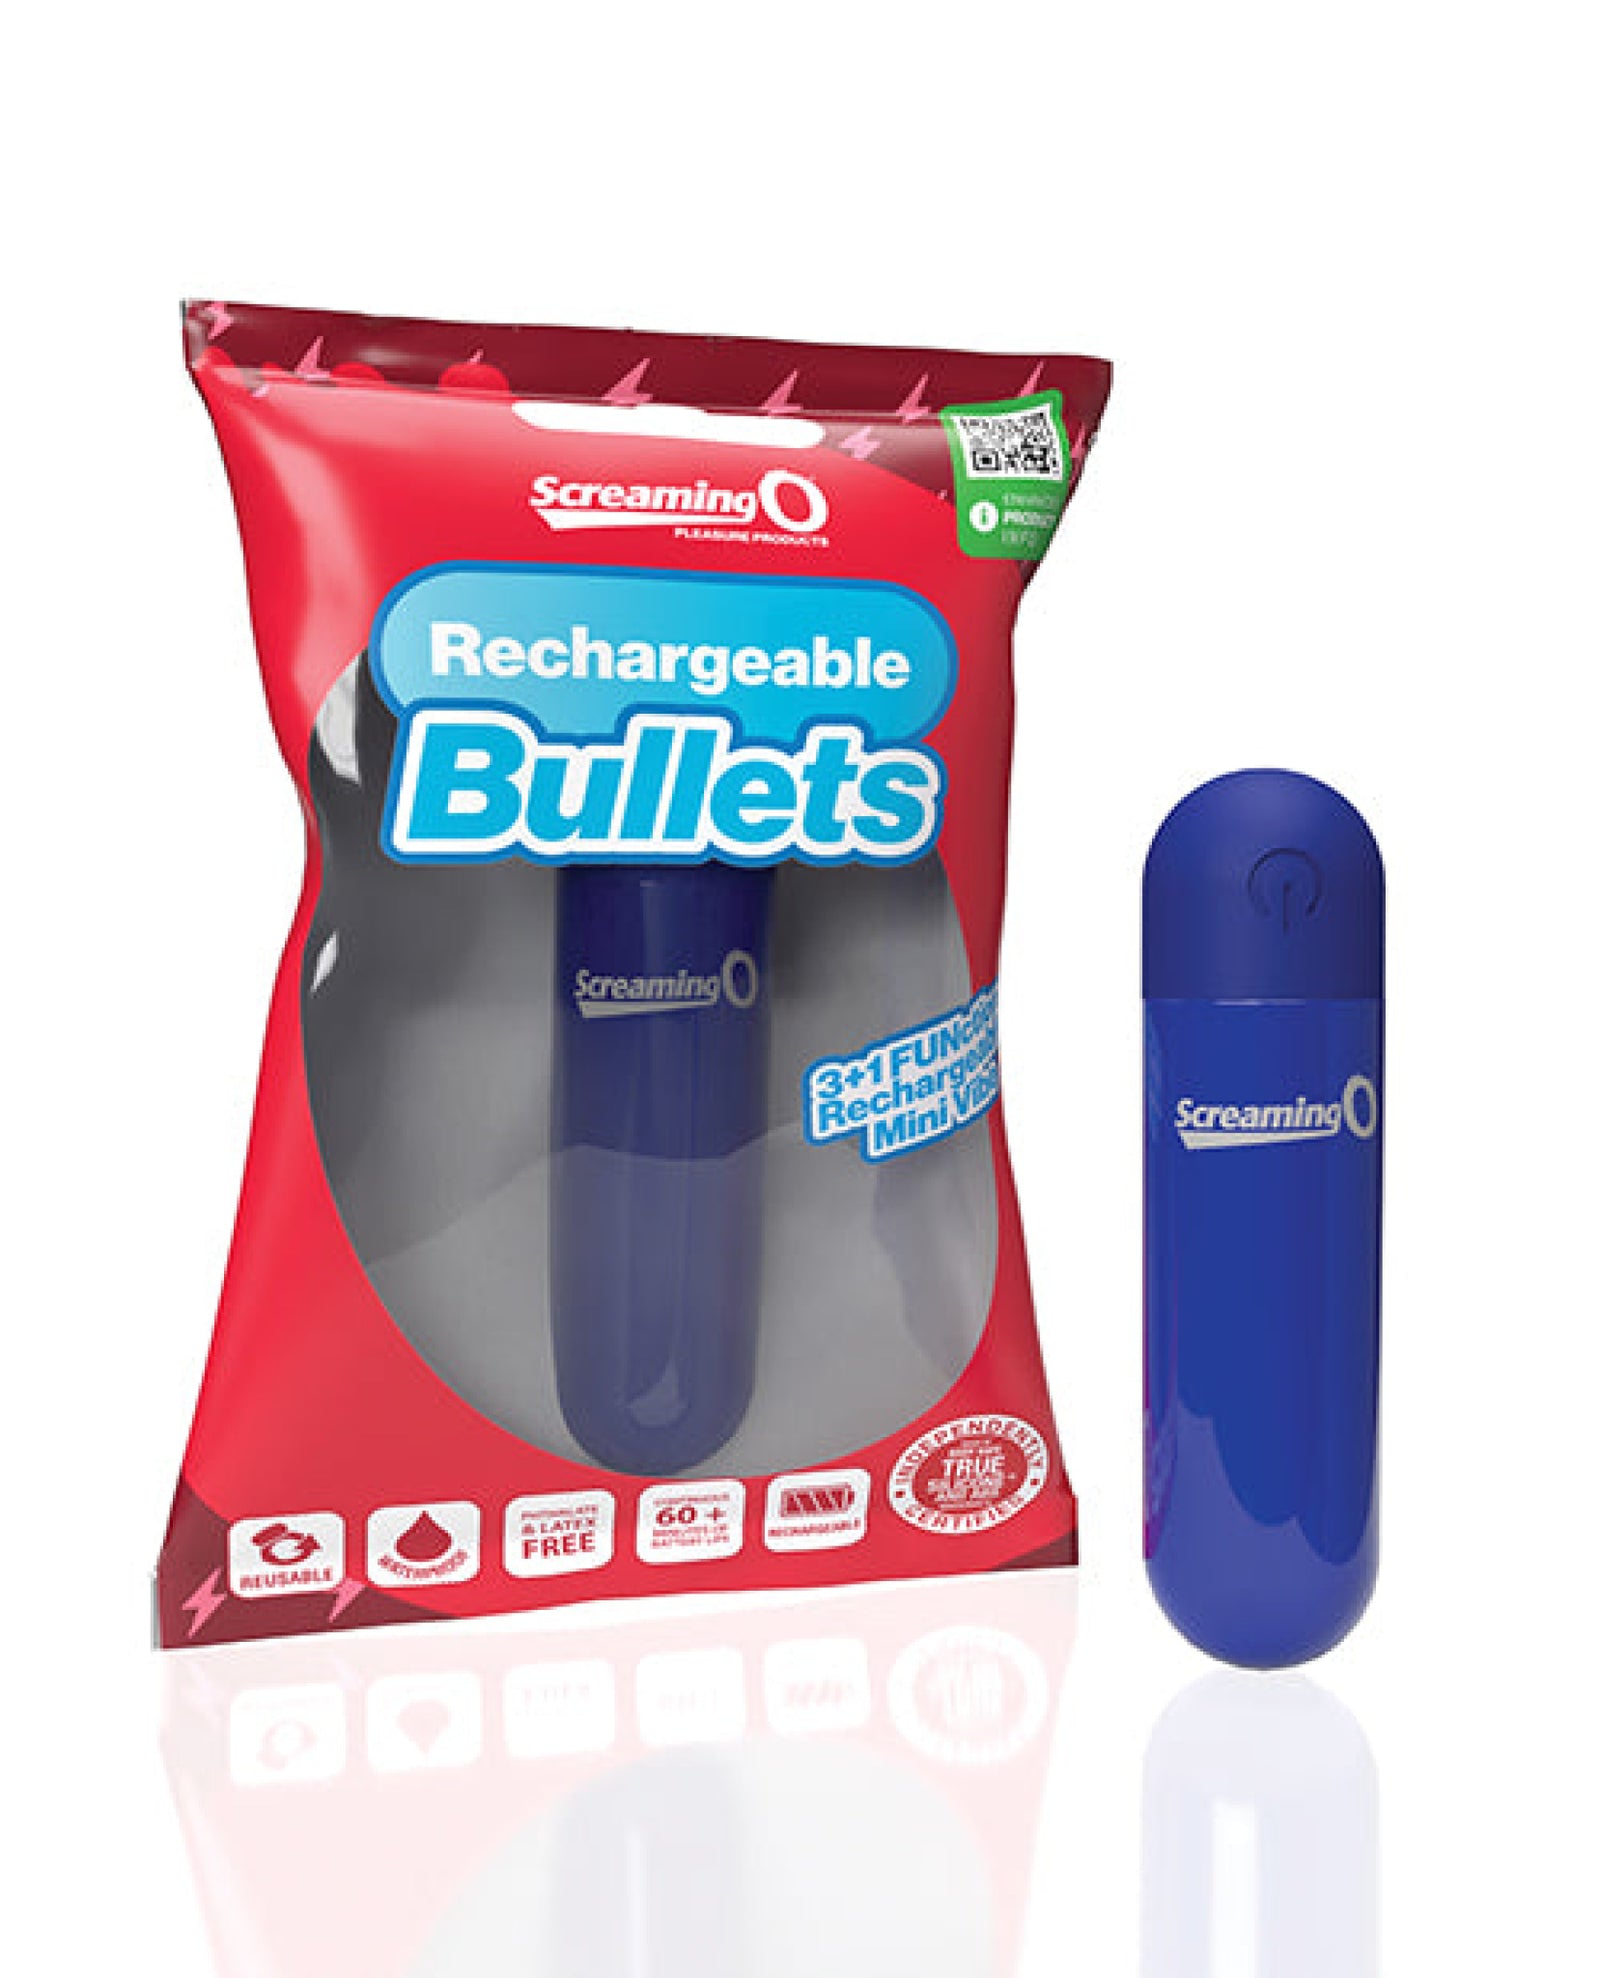 Screaming O Rechargeable Bullets Bushman Products